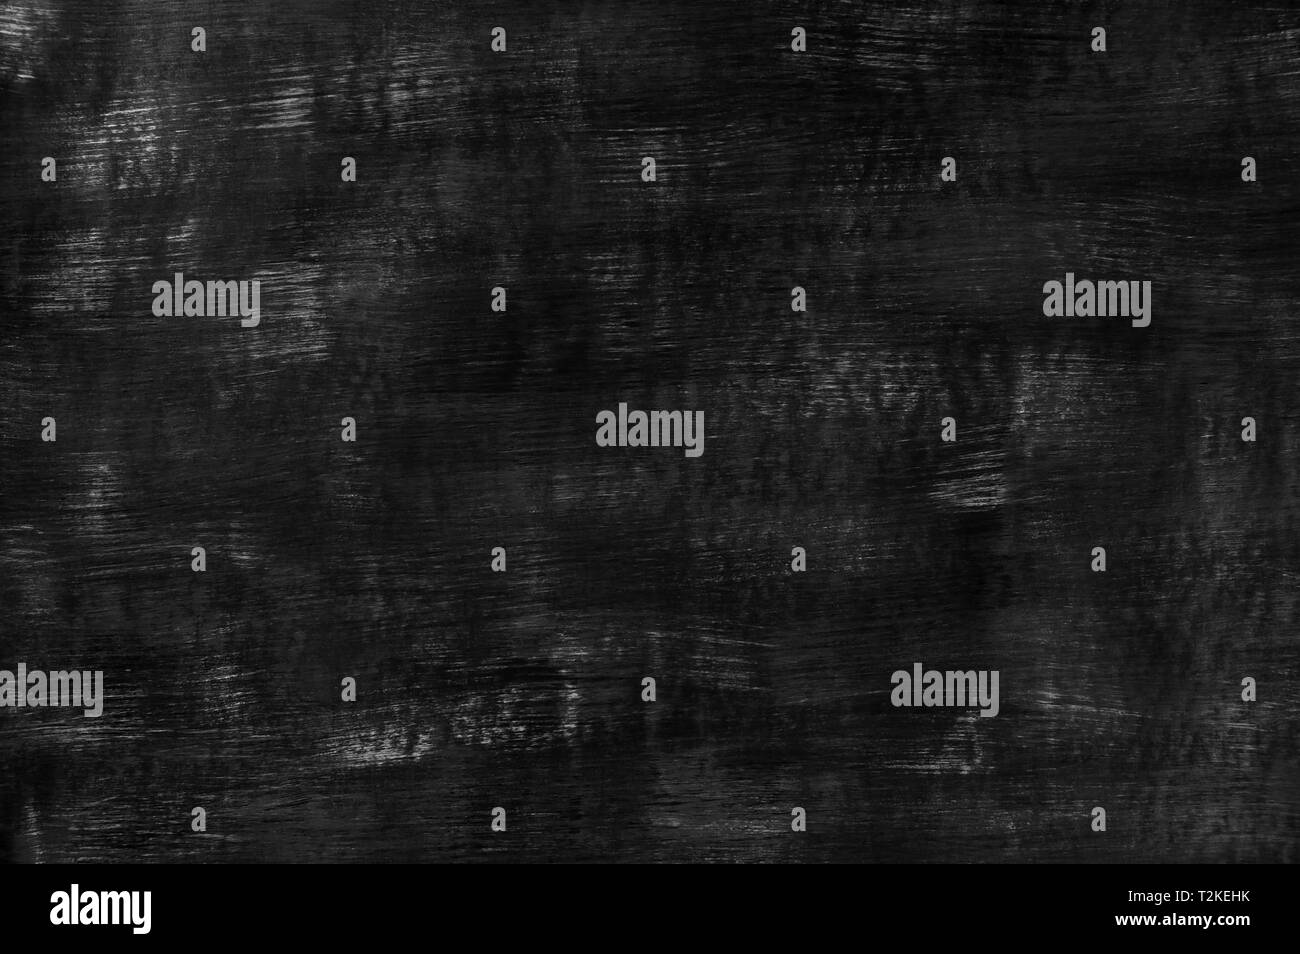 Minimalist paint texture background with black, white and grey tones Stock Photo